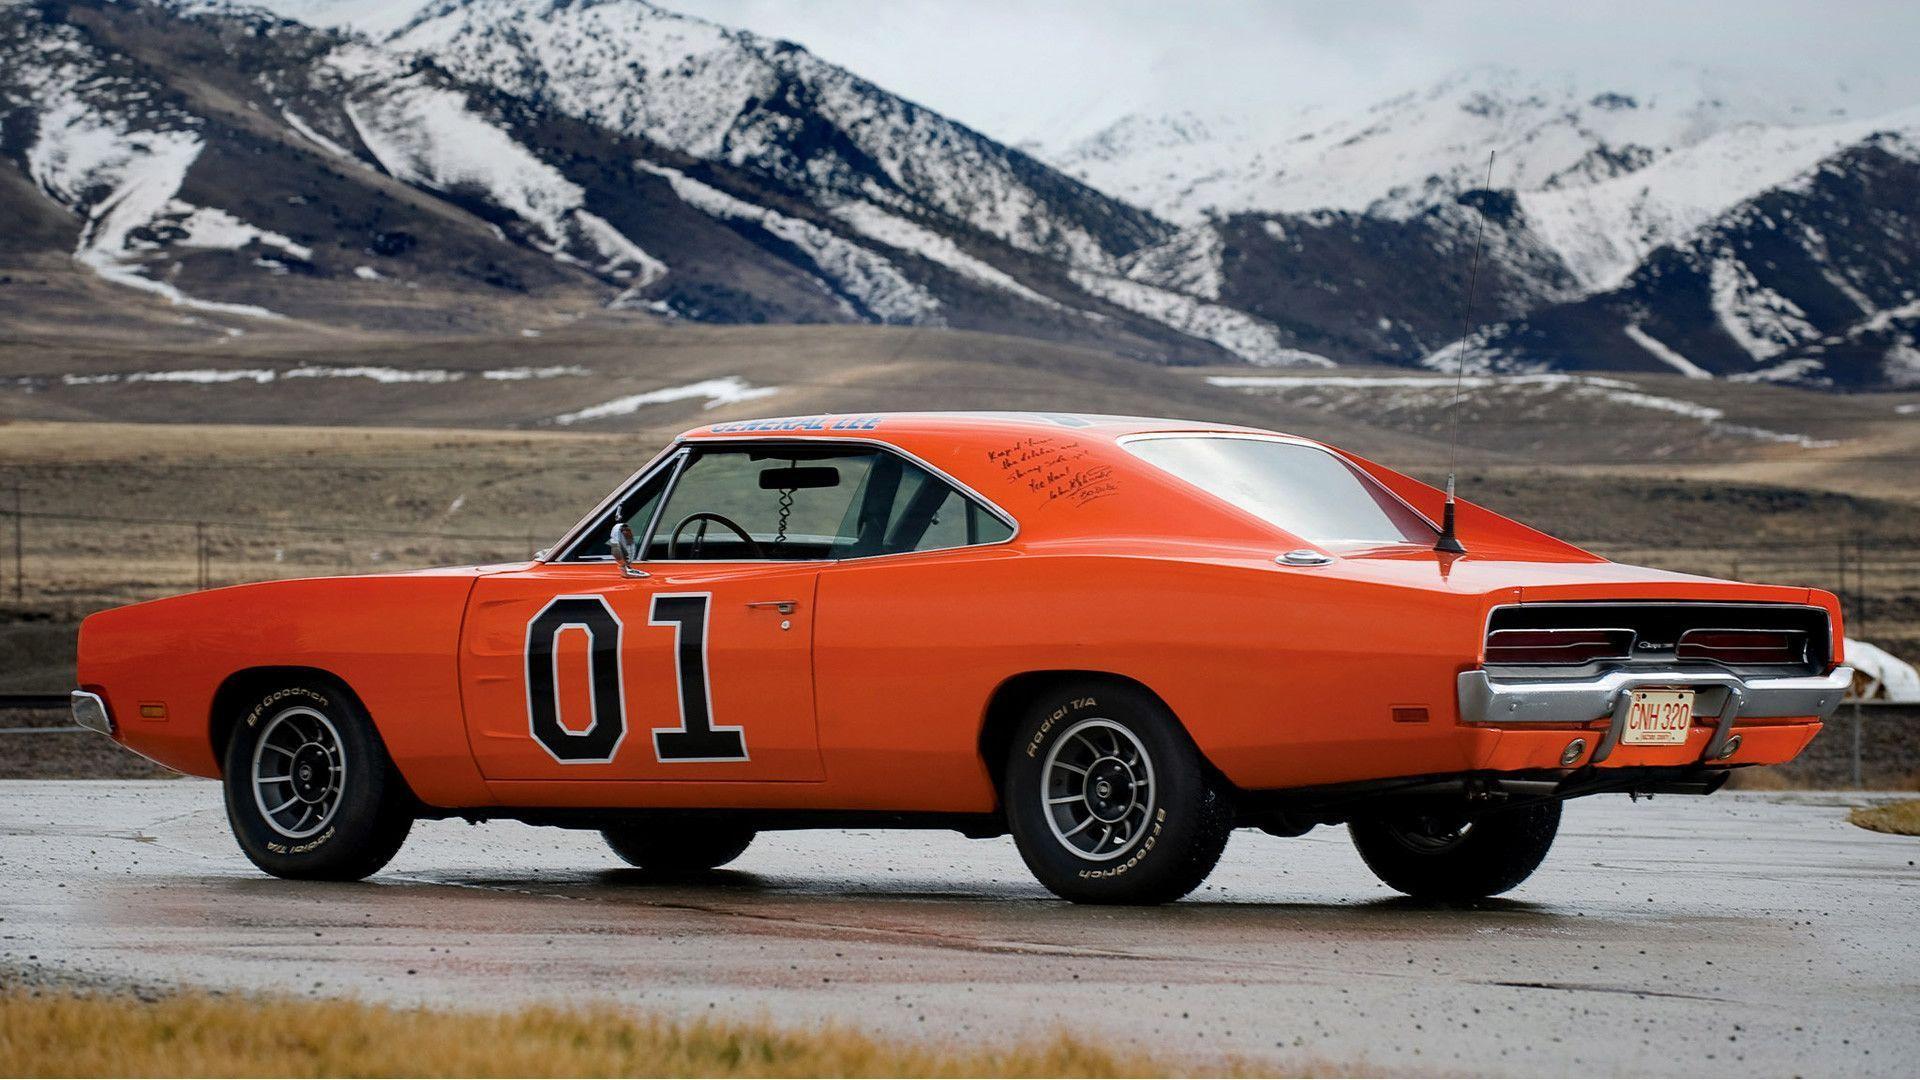 Dukes Of Hazzard General Lee Wallpapers Image & Pictures.